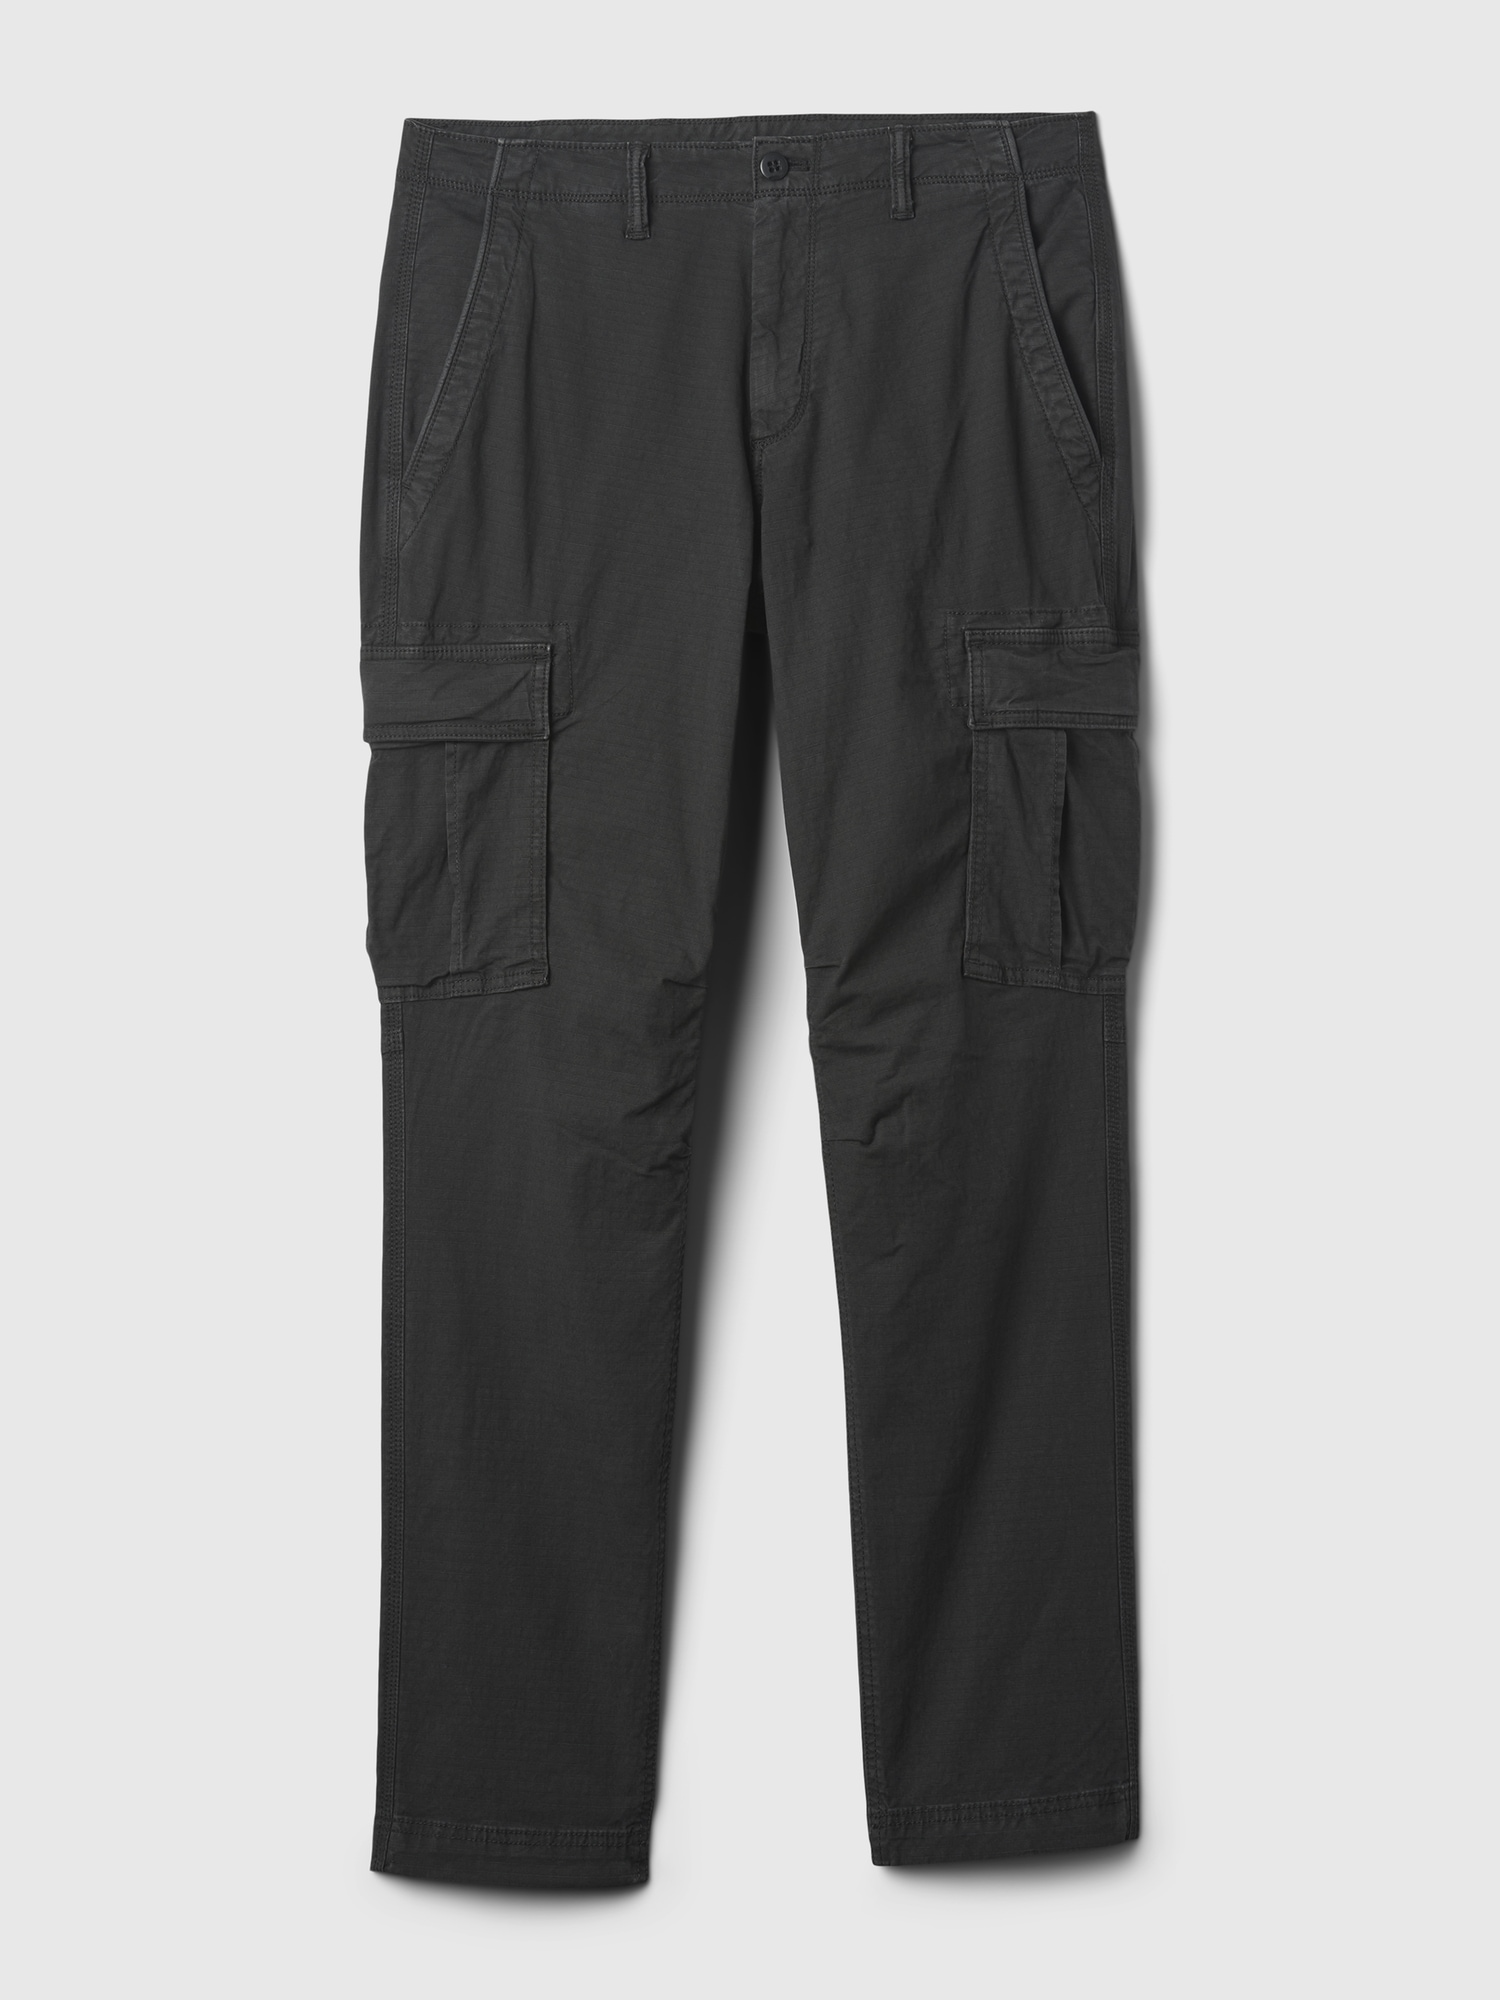 Stretch Twill SLIM-FIT Cargo Pants for Tall Men in Camo Green